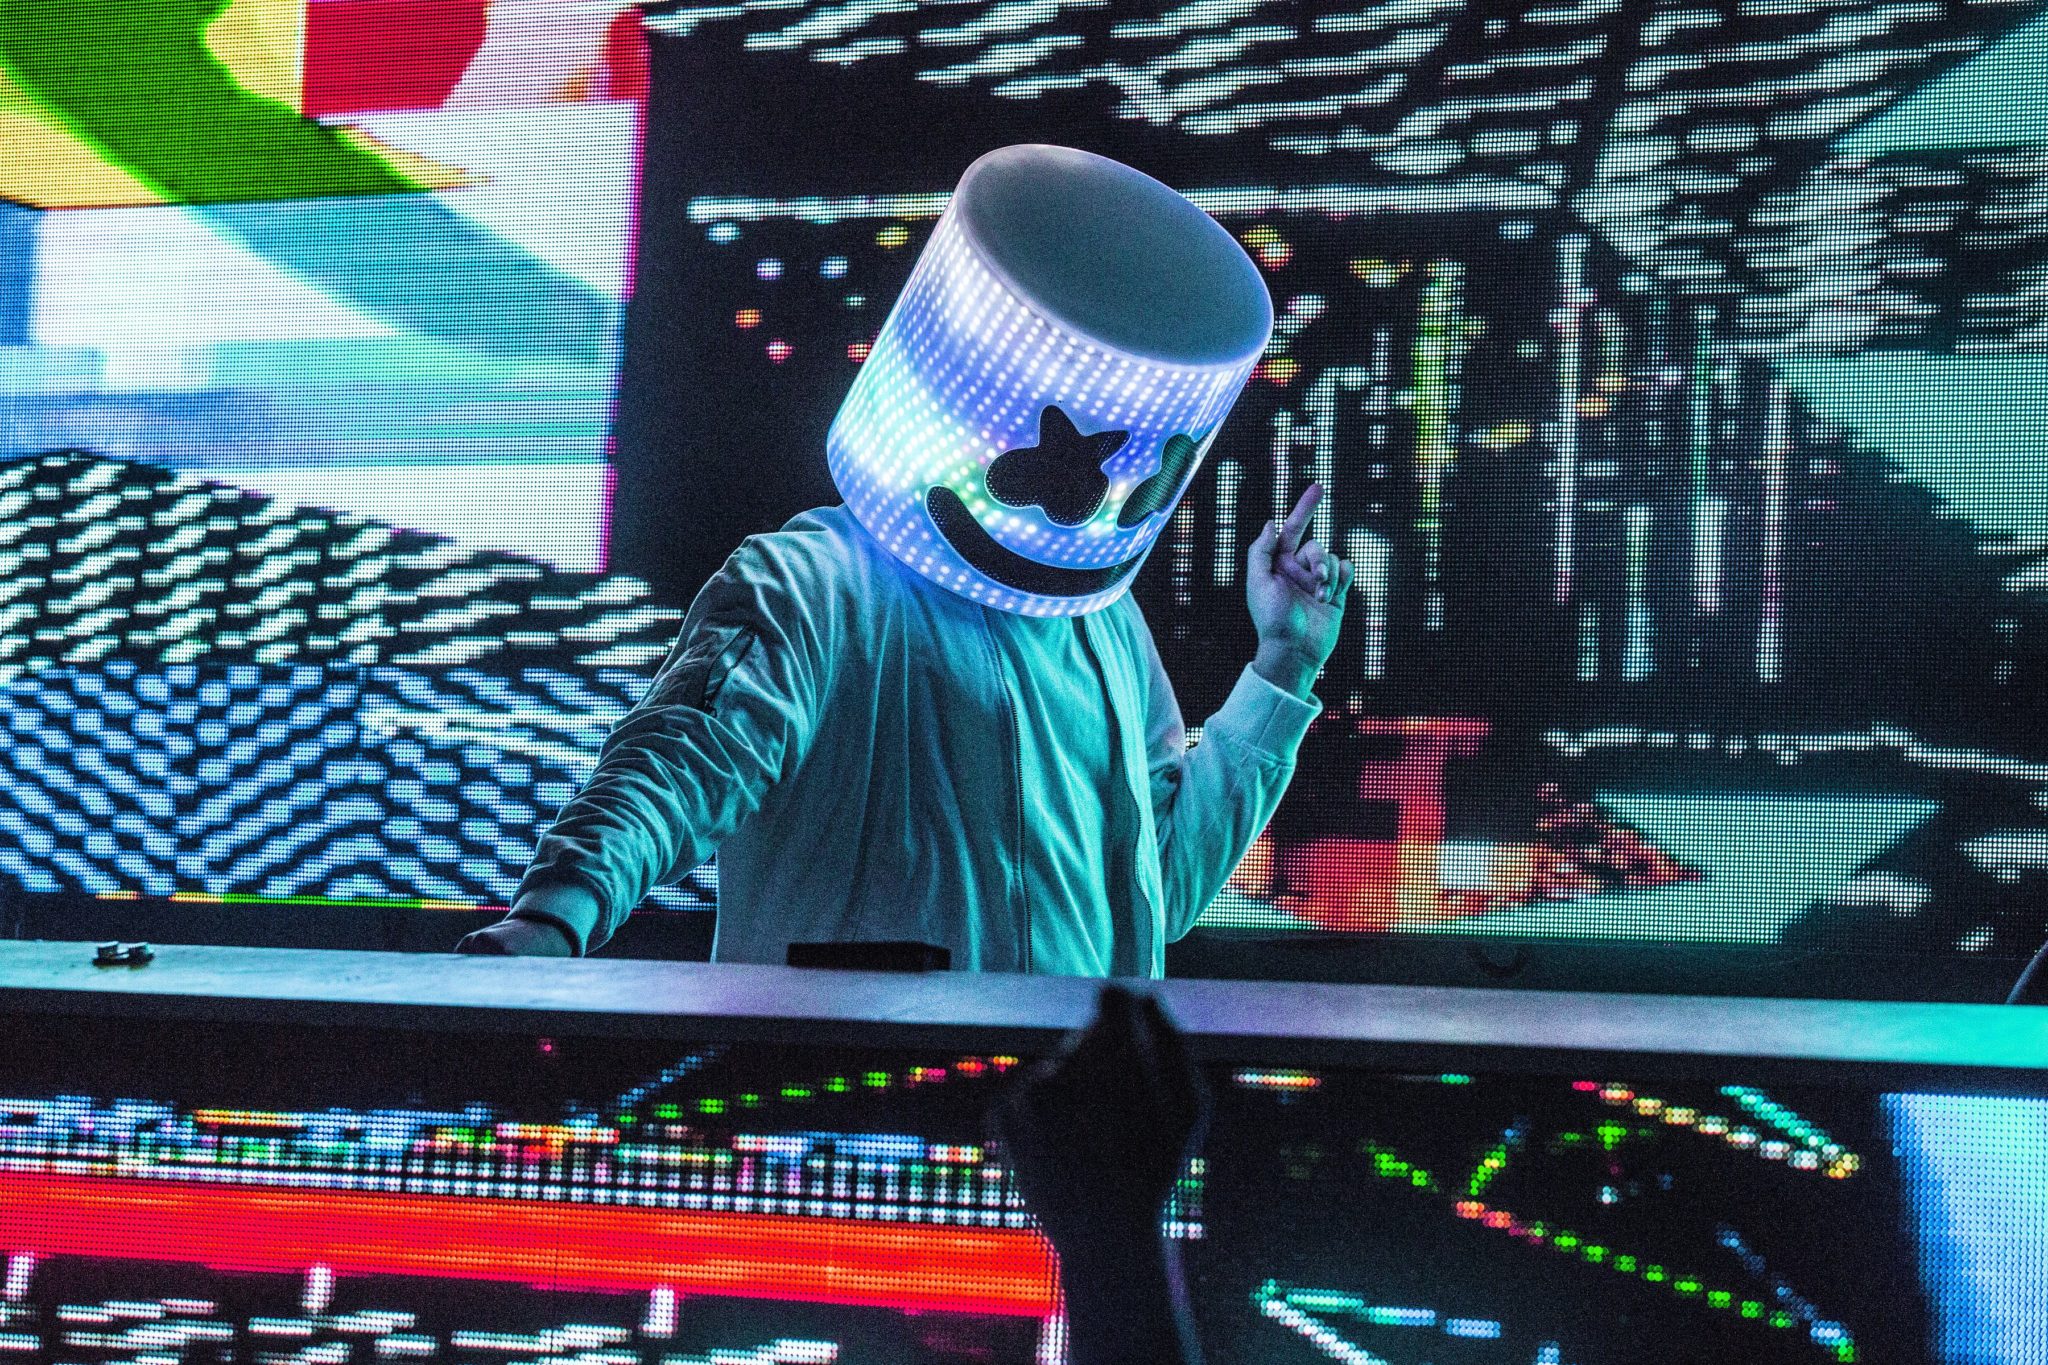 Marshmello 4k Wallpaper For Android iPhones